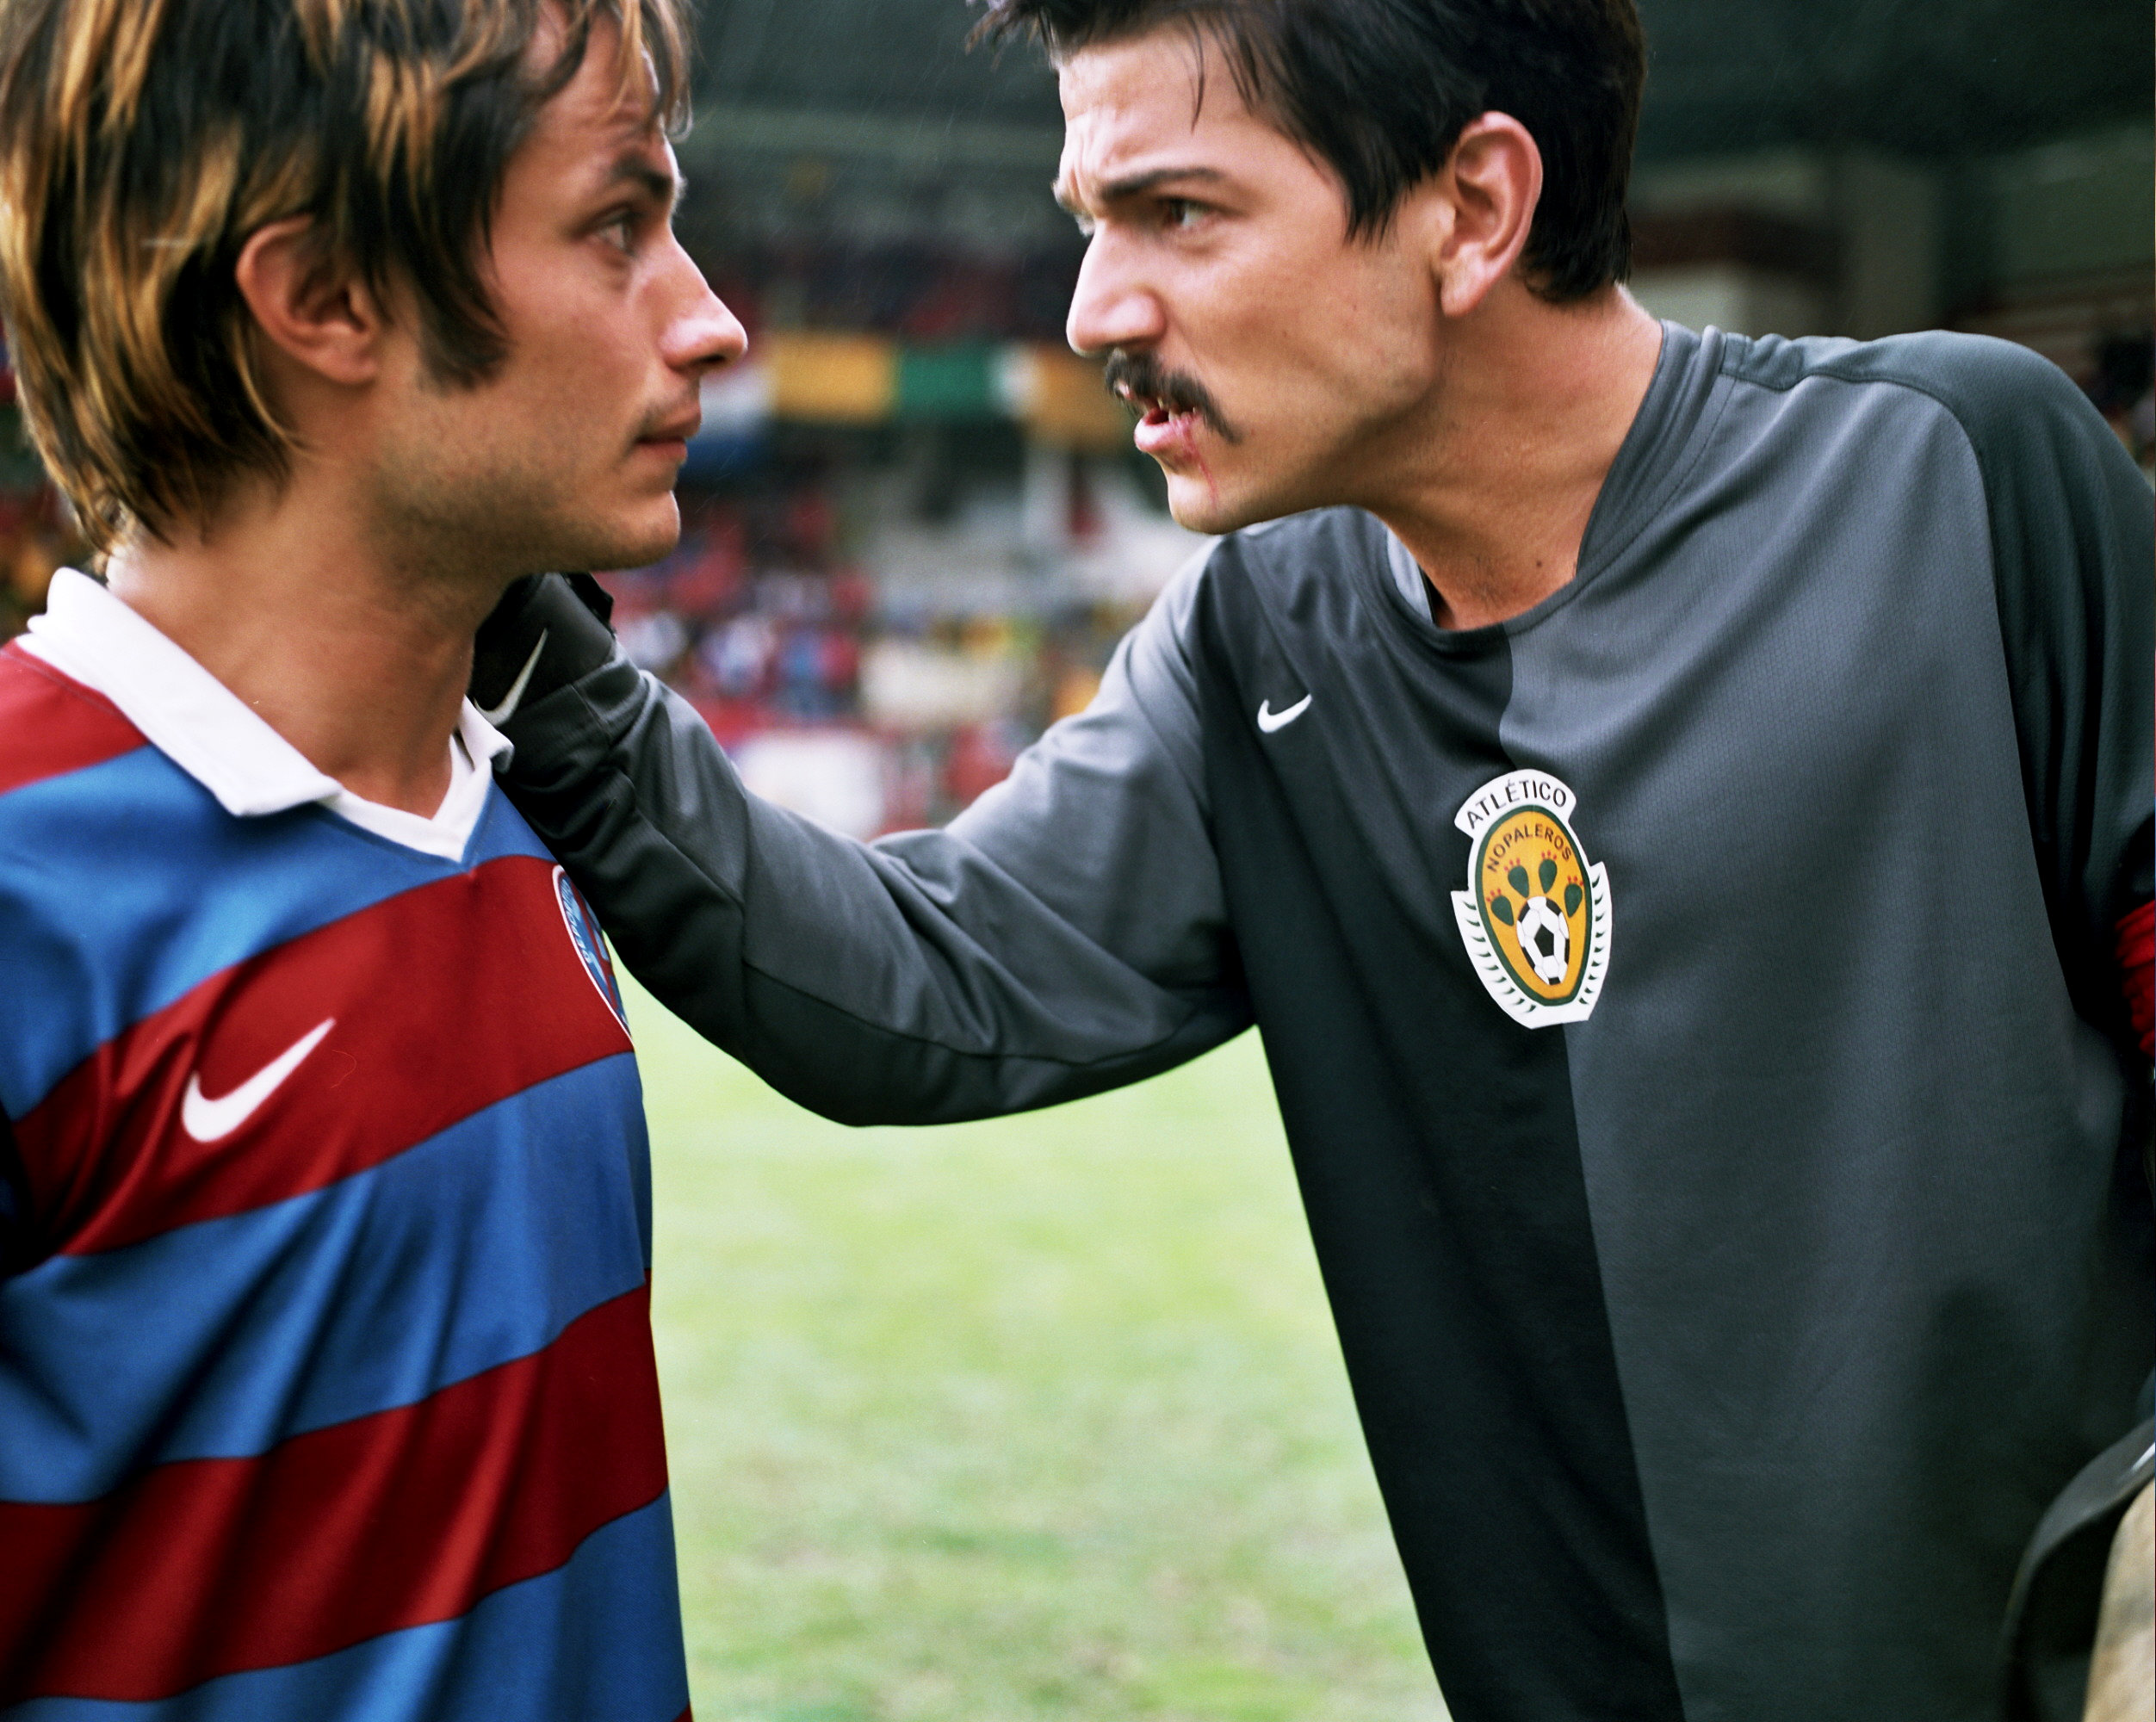 Gael Garcia Bernal stars as Tato and Diego Luna stars as Beto in Sony Pictures Classics' Rudo y Cursi (2009)